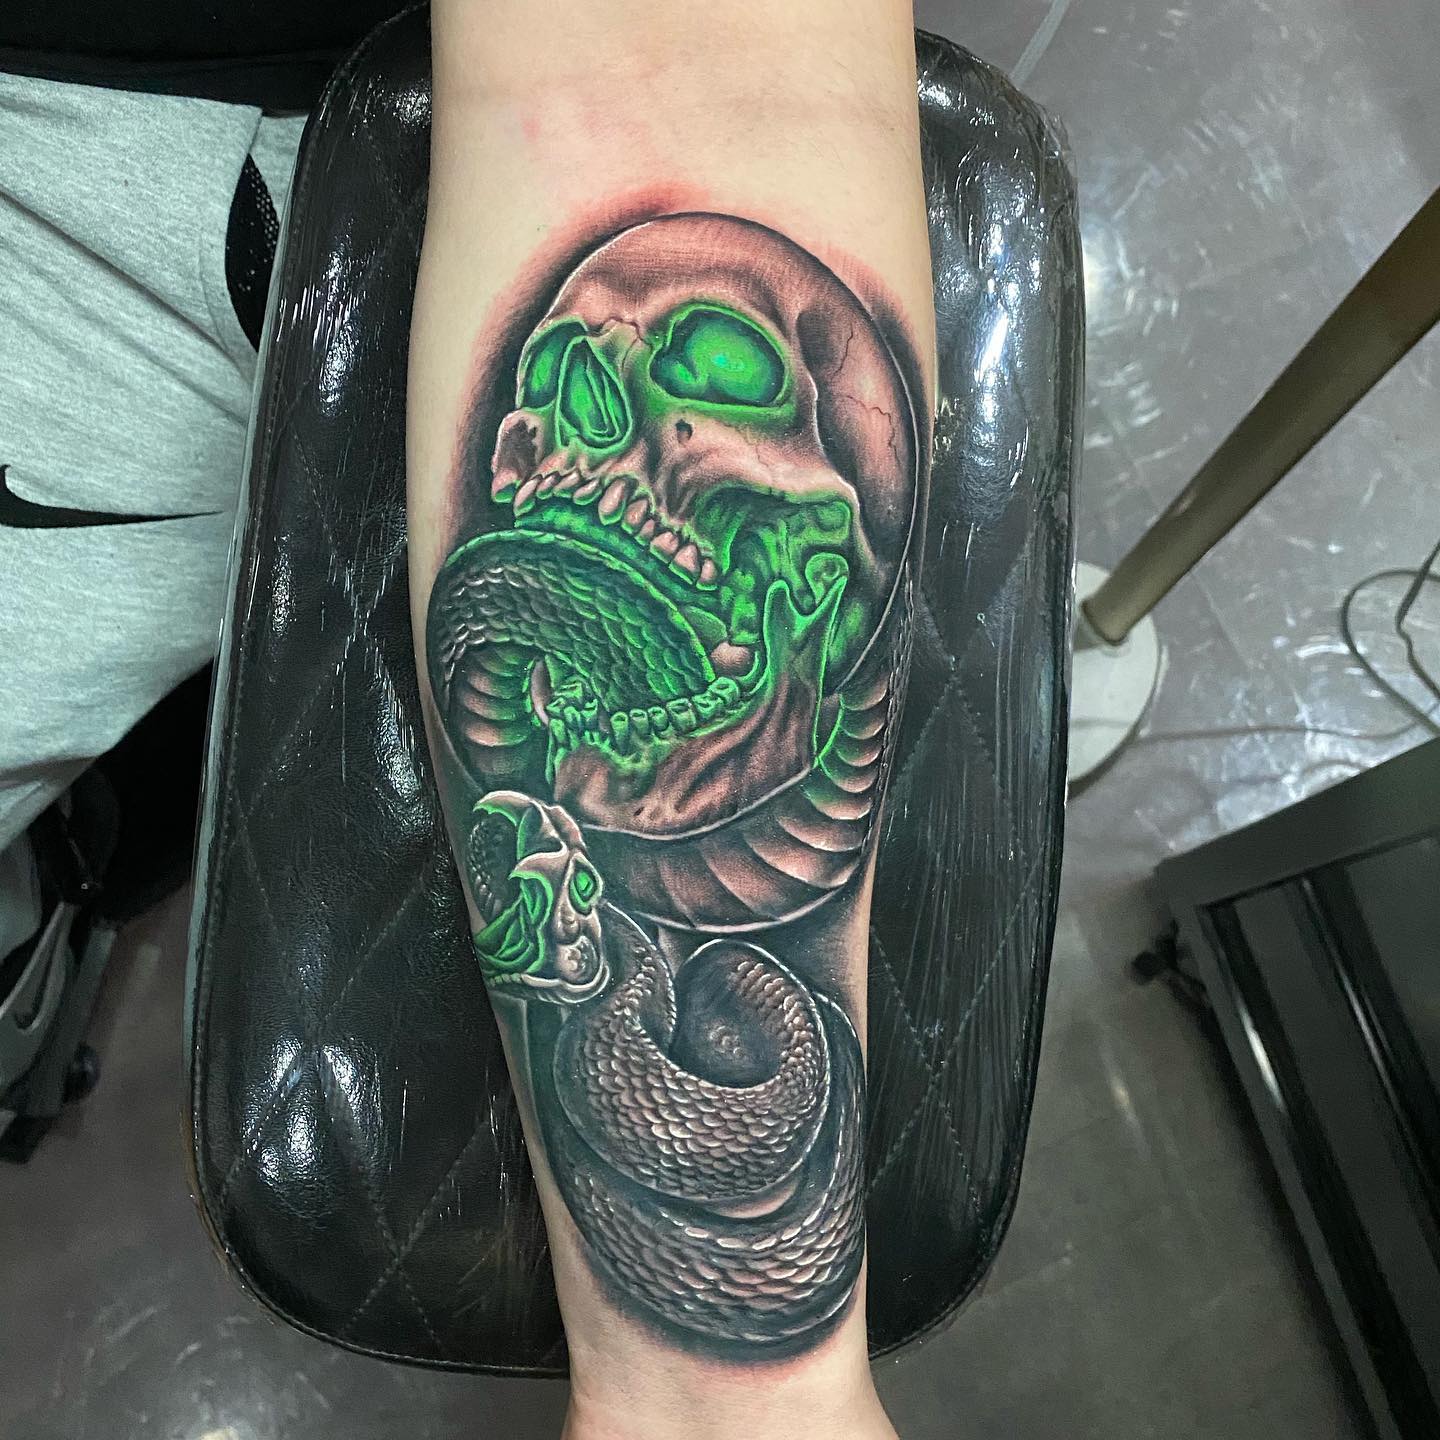 Doesn't it look so real? It feels like the snake will come out of the body and bite! If you wanna get a highly detailed and real-like death eater tattoo, go for this with some green light effect.